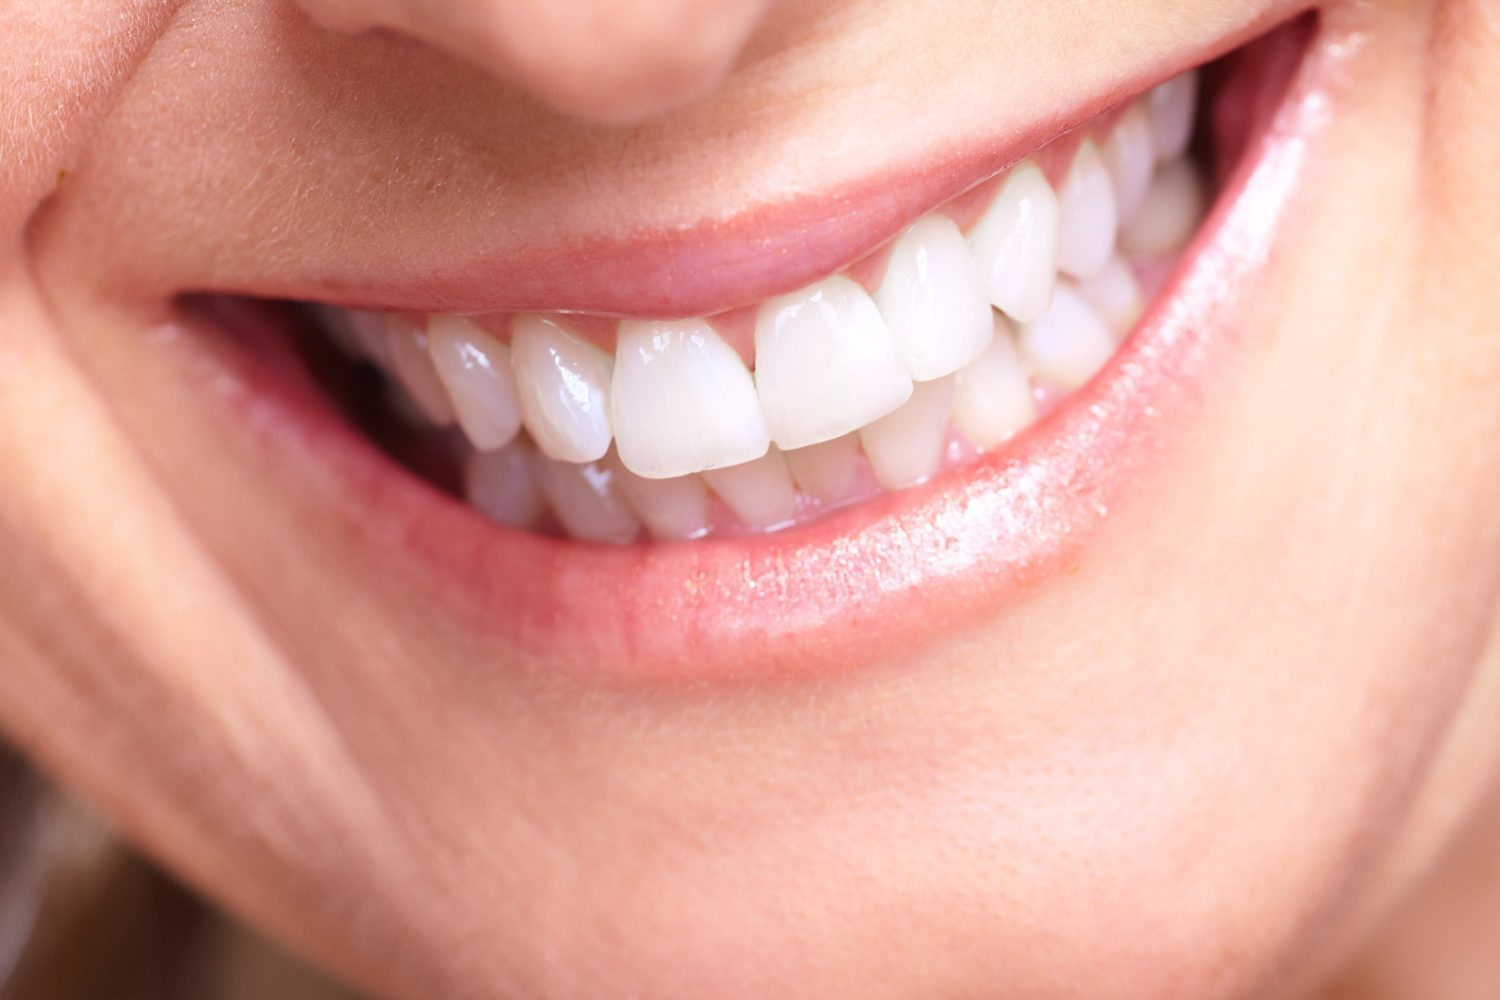 Cosmetic Dentistry Options for Chipped Teeth